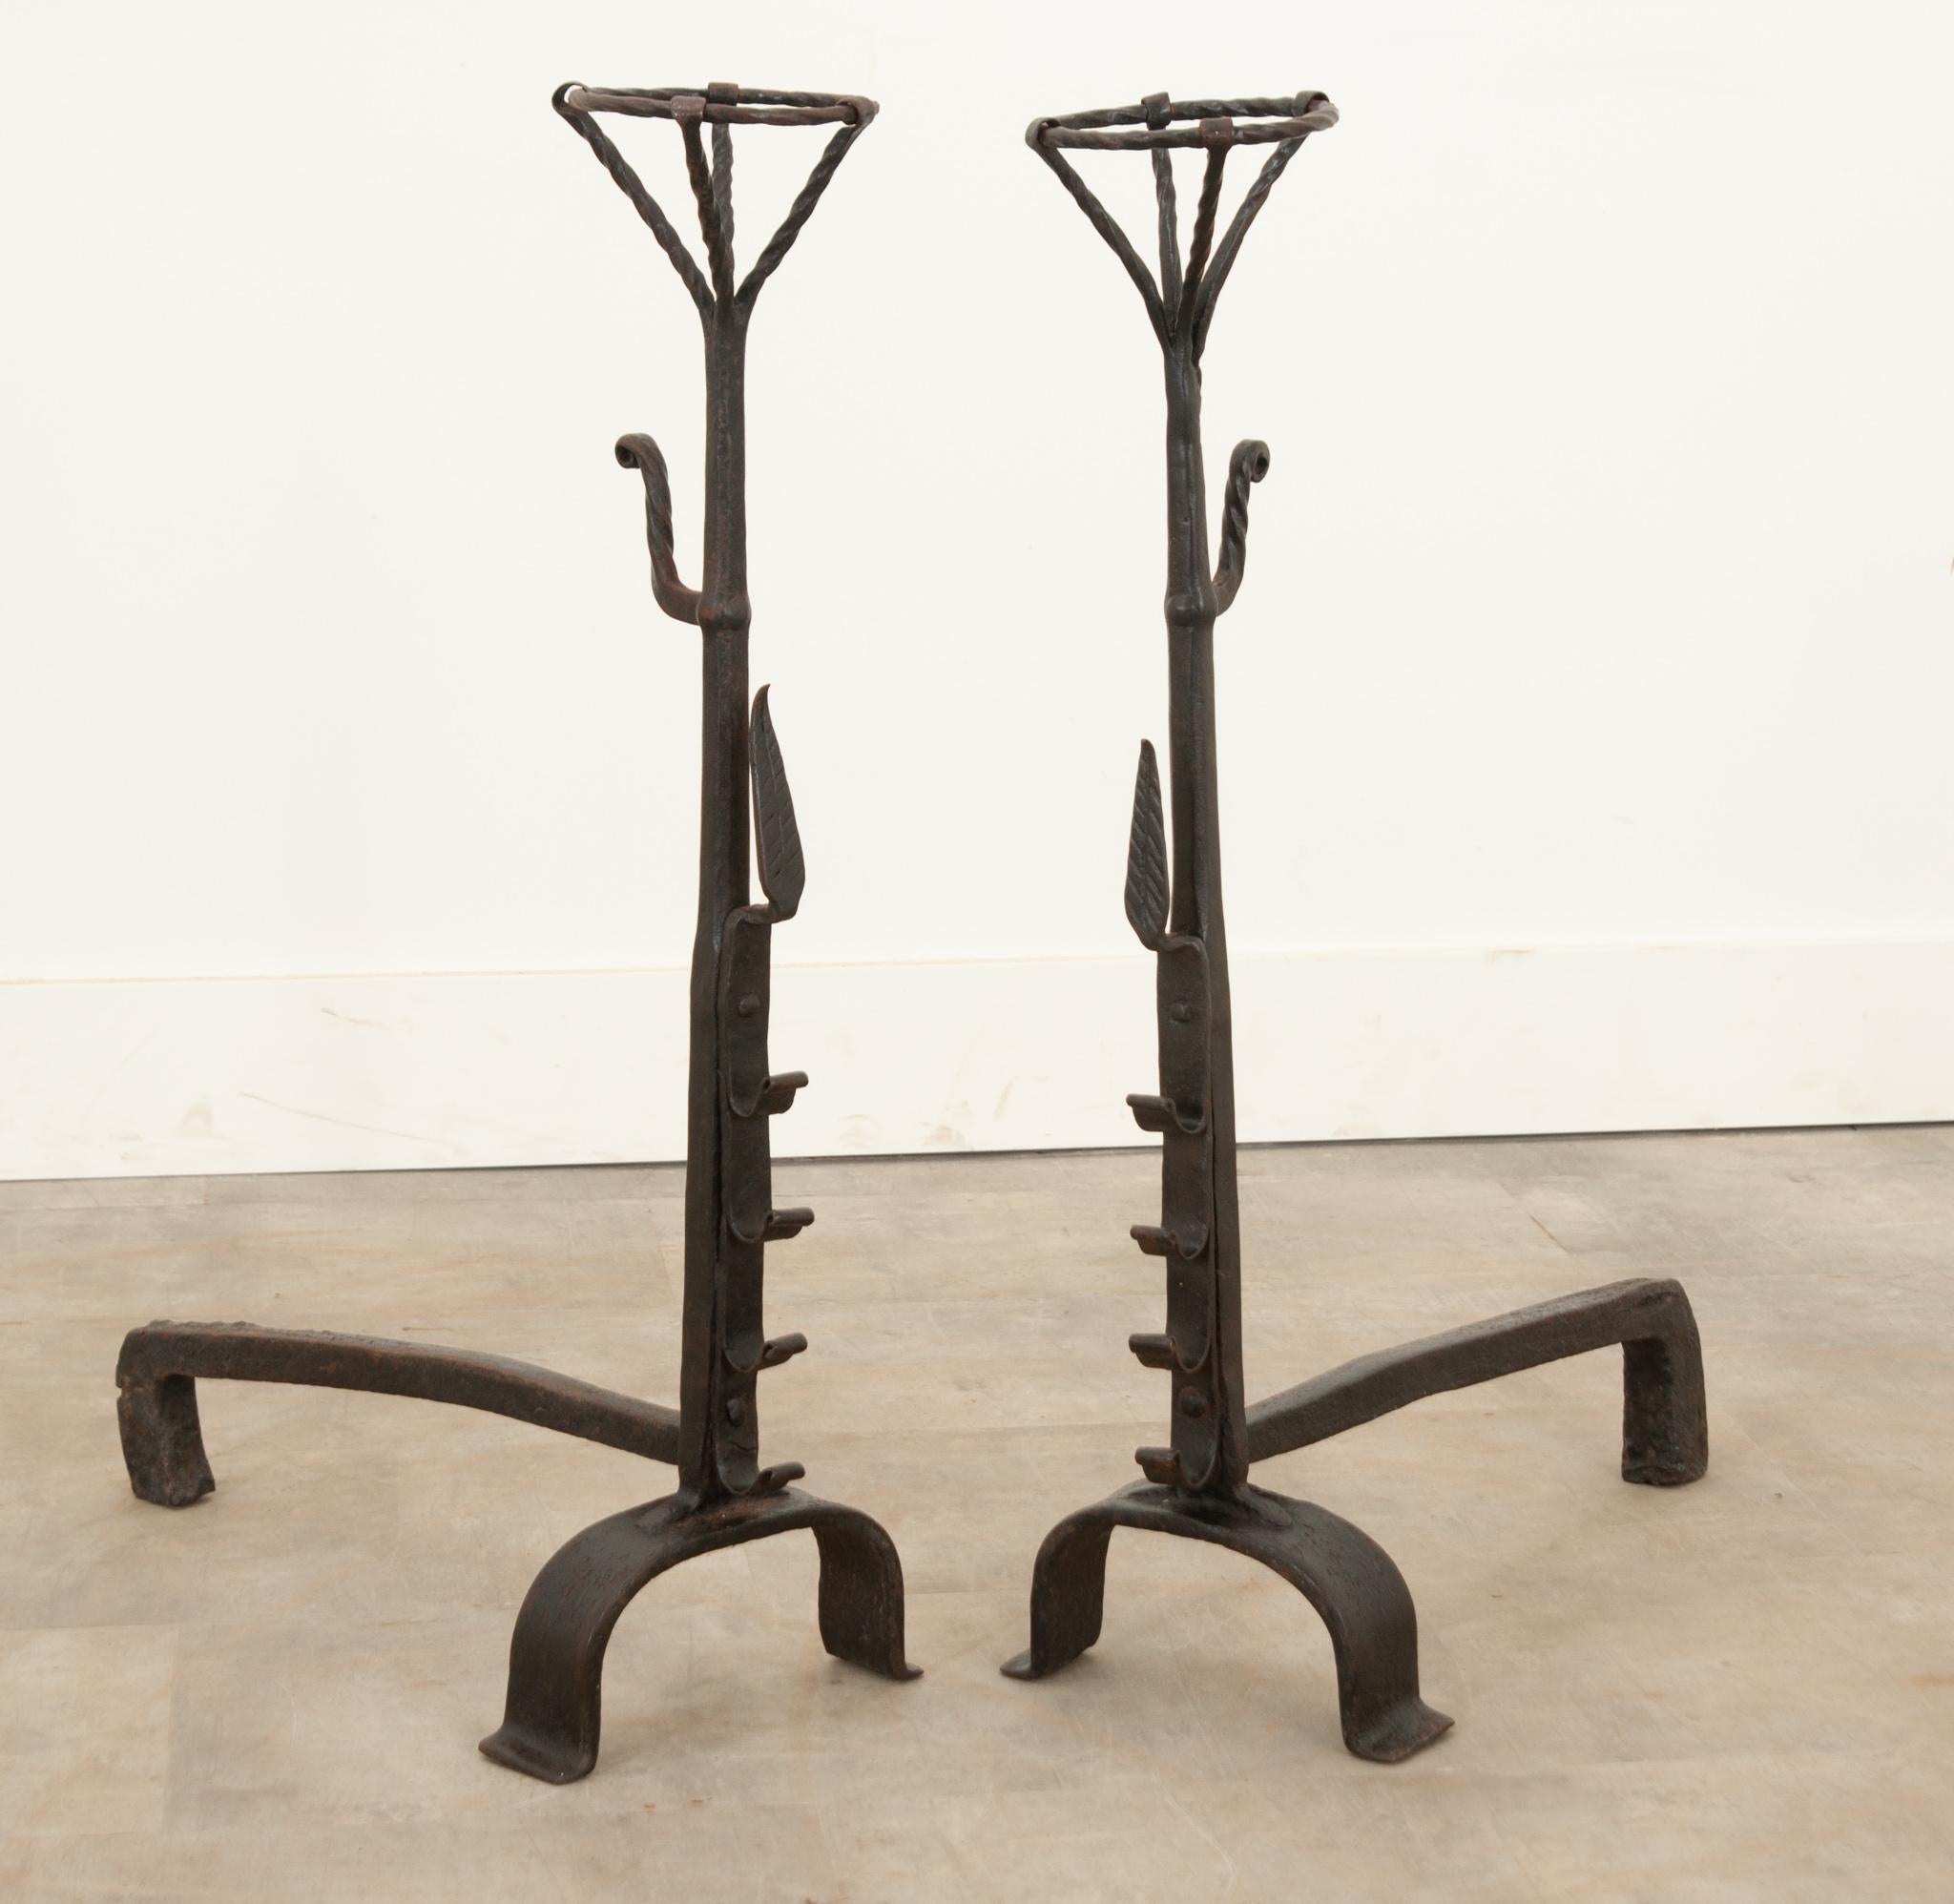 This pair of hand forged iron andirons come from 19th century France. Used to support logs, these L shaped brackets are simply constructed. A unique detail on the front of the andirons, a forged notches dedicated for roasting sticks to cook over the